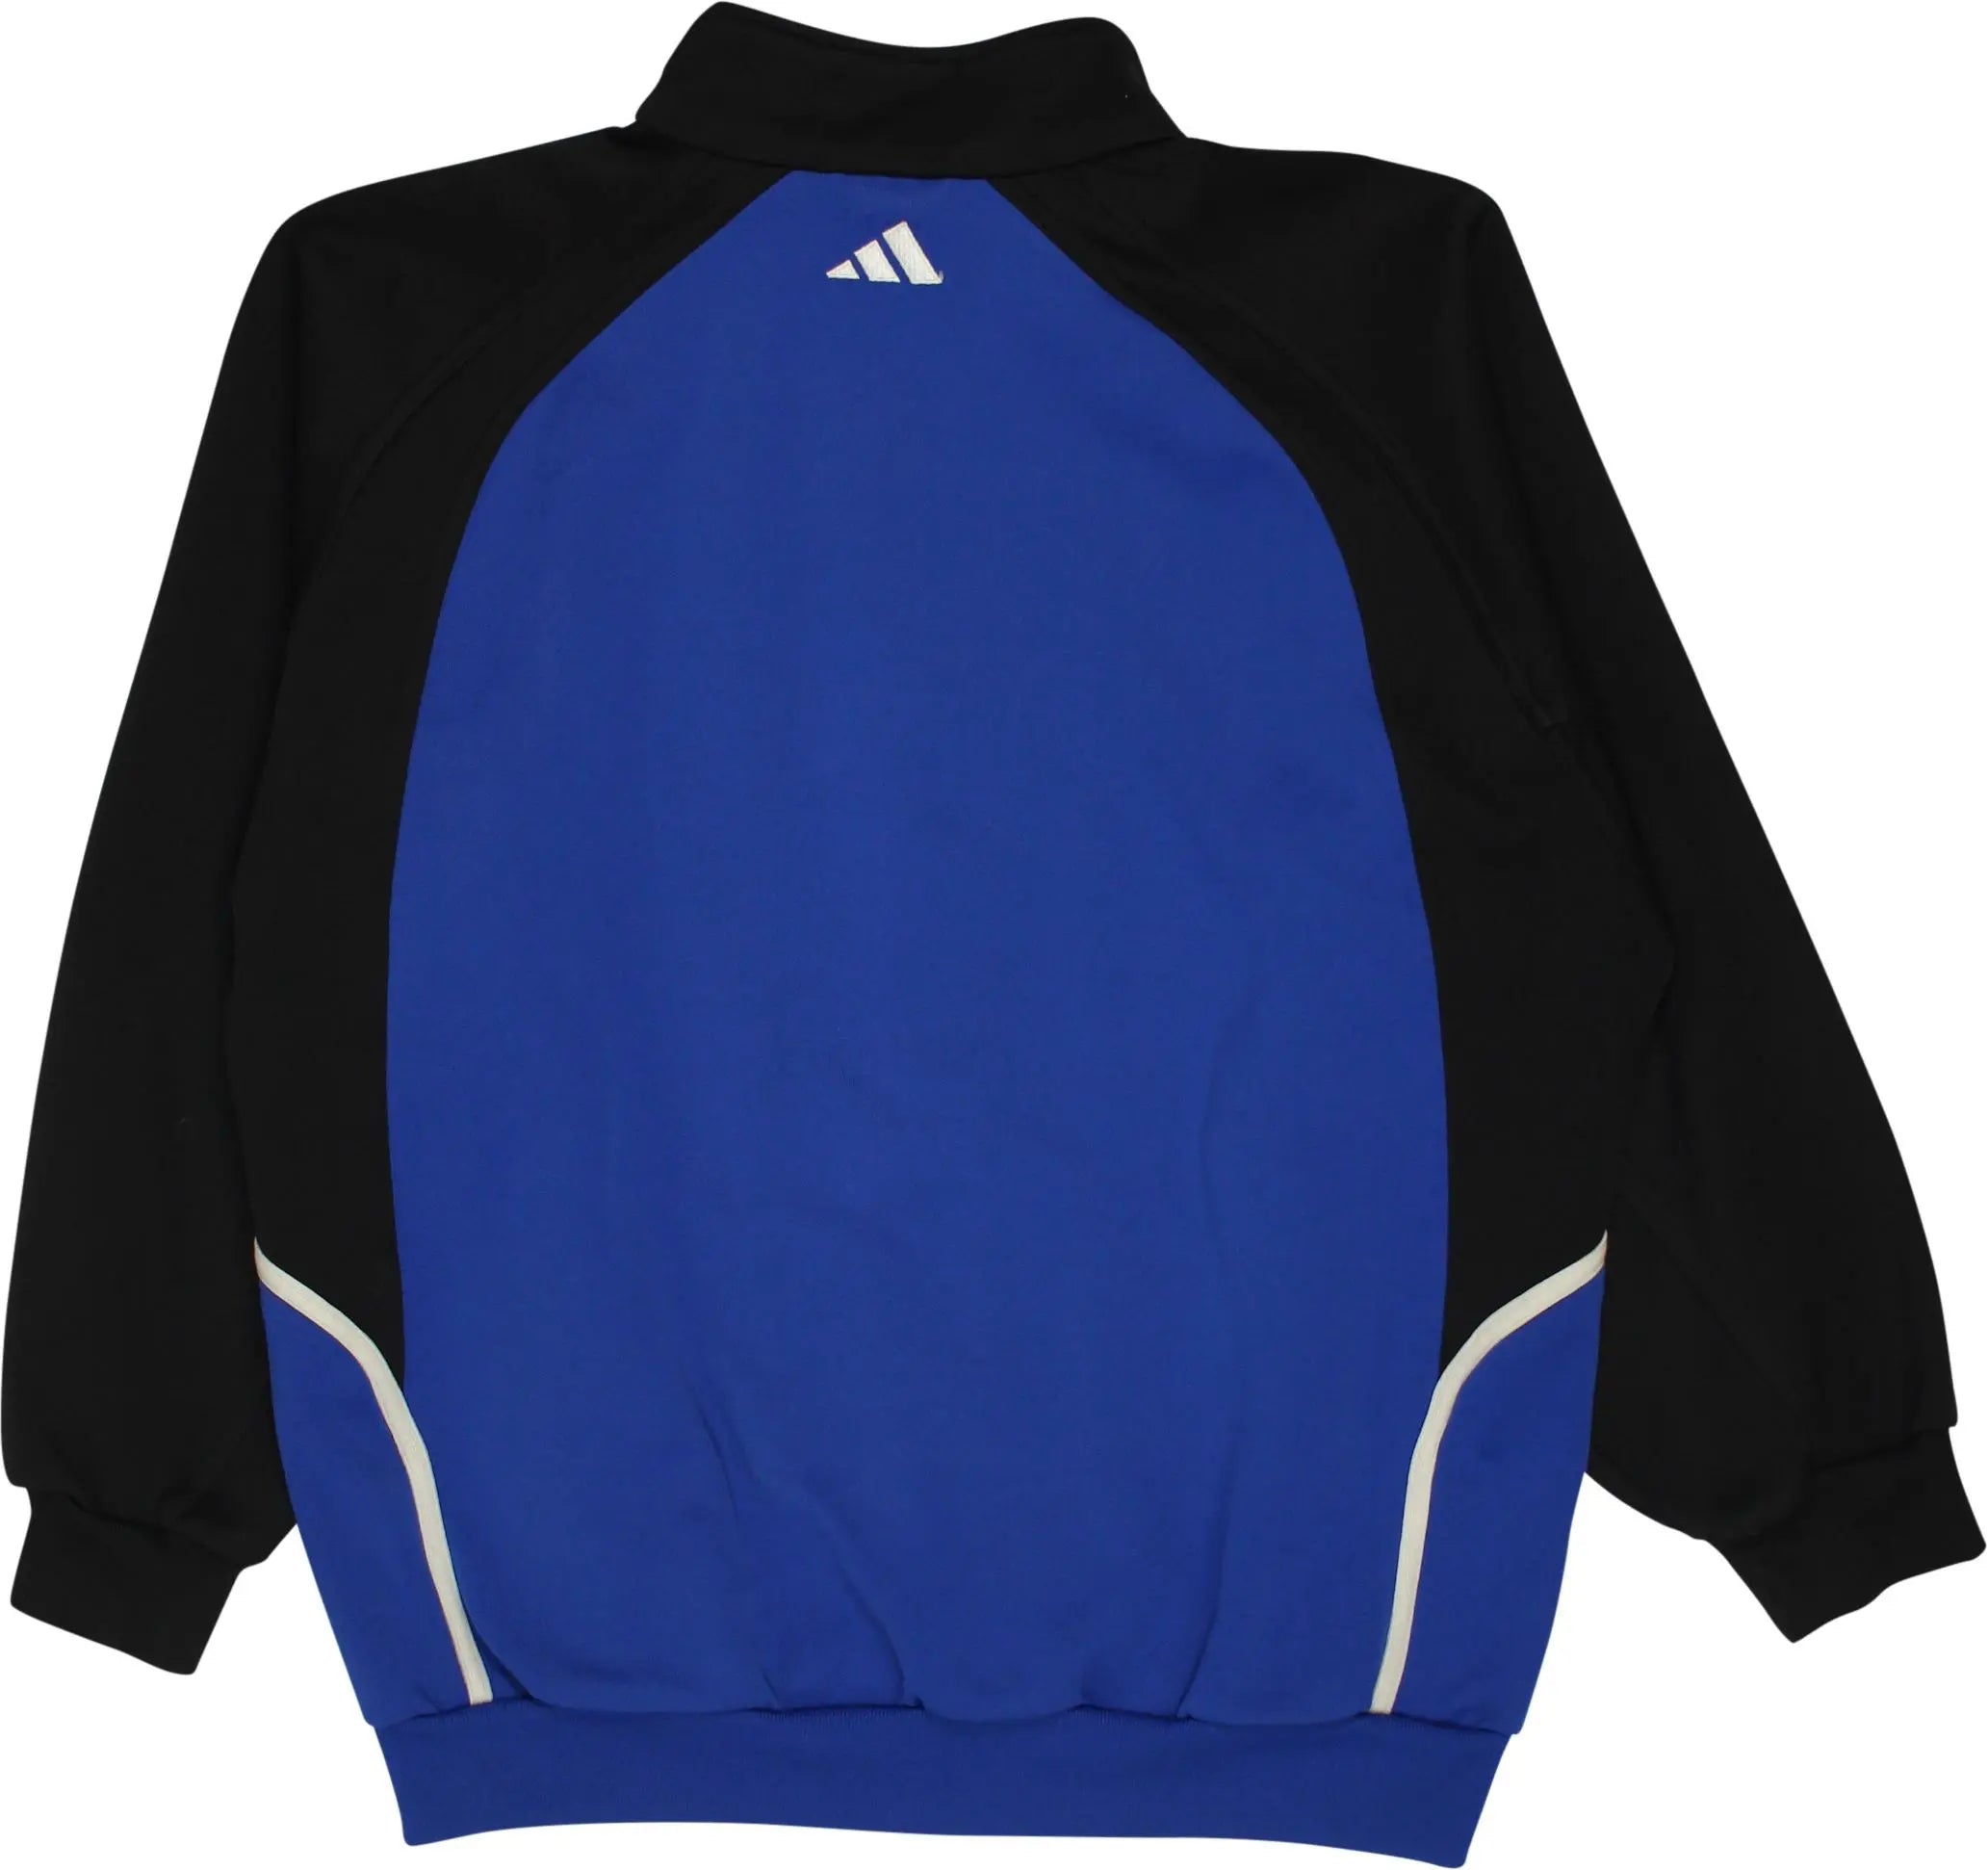 Adidas - Adidas Track Jacket- ThriftTale.com - Vintage and second handclothing